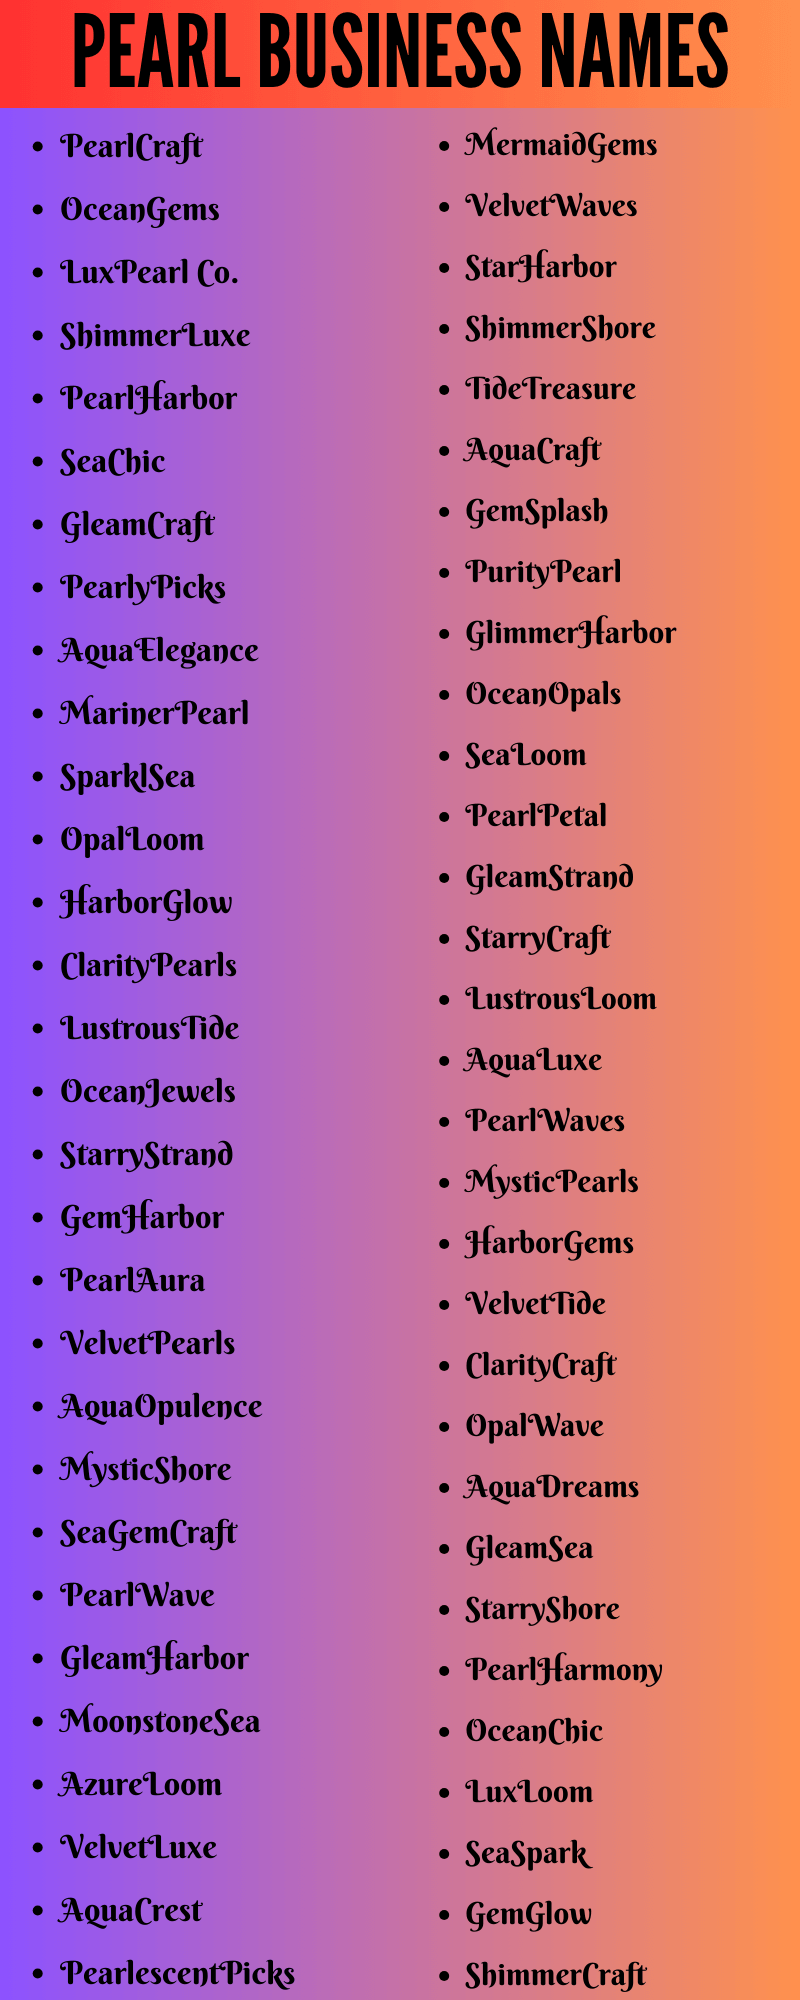 Pearl Business Names